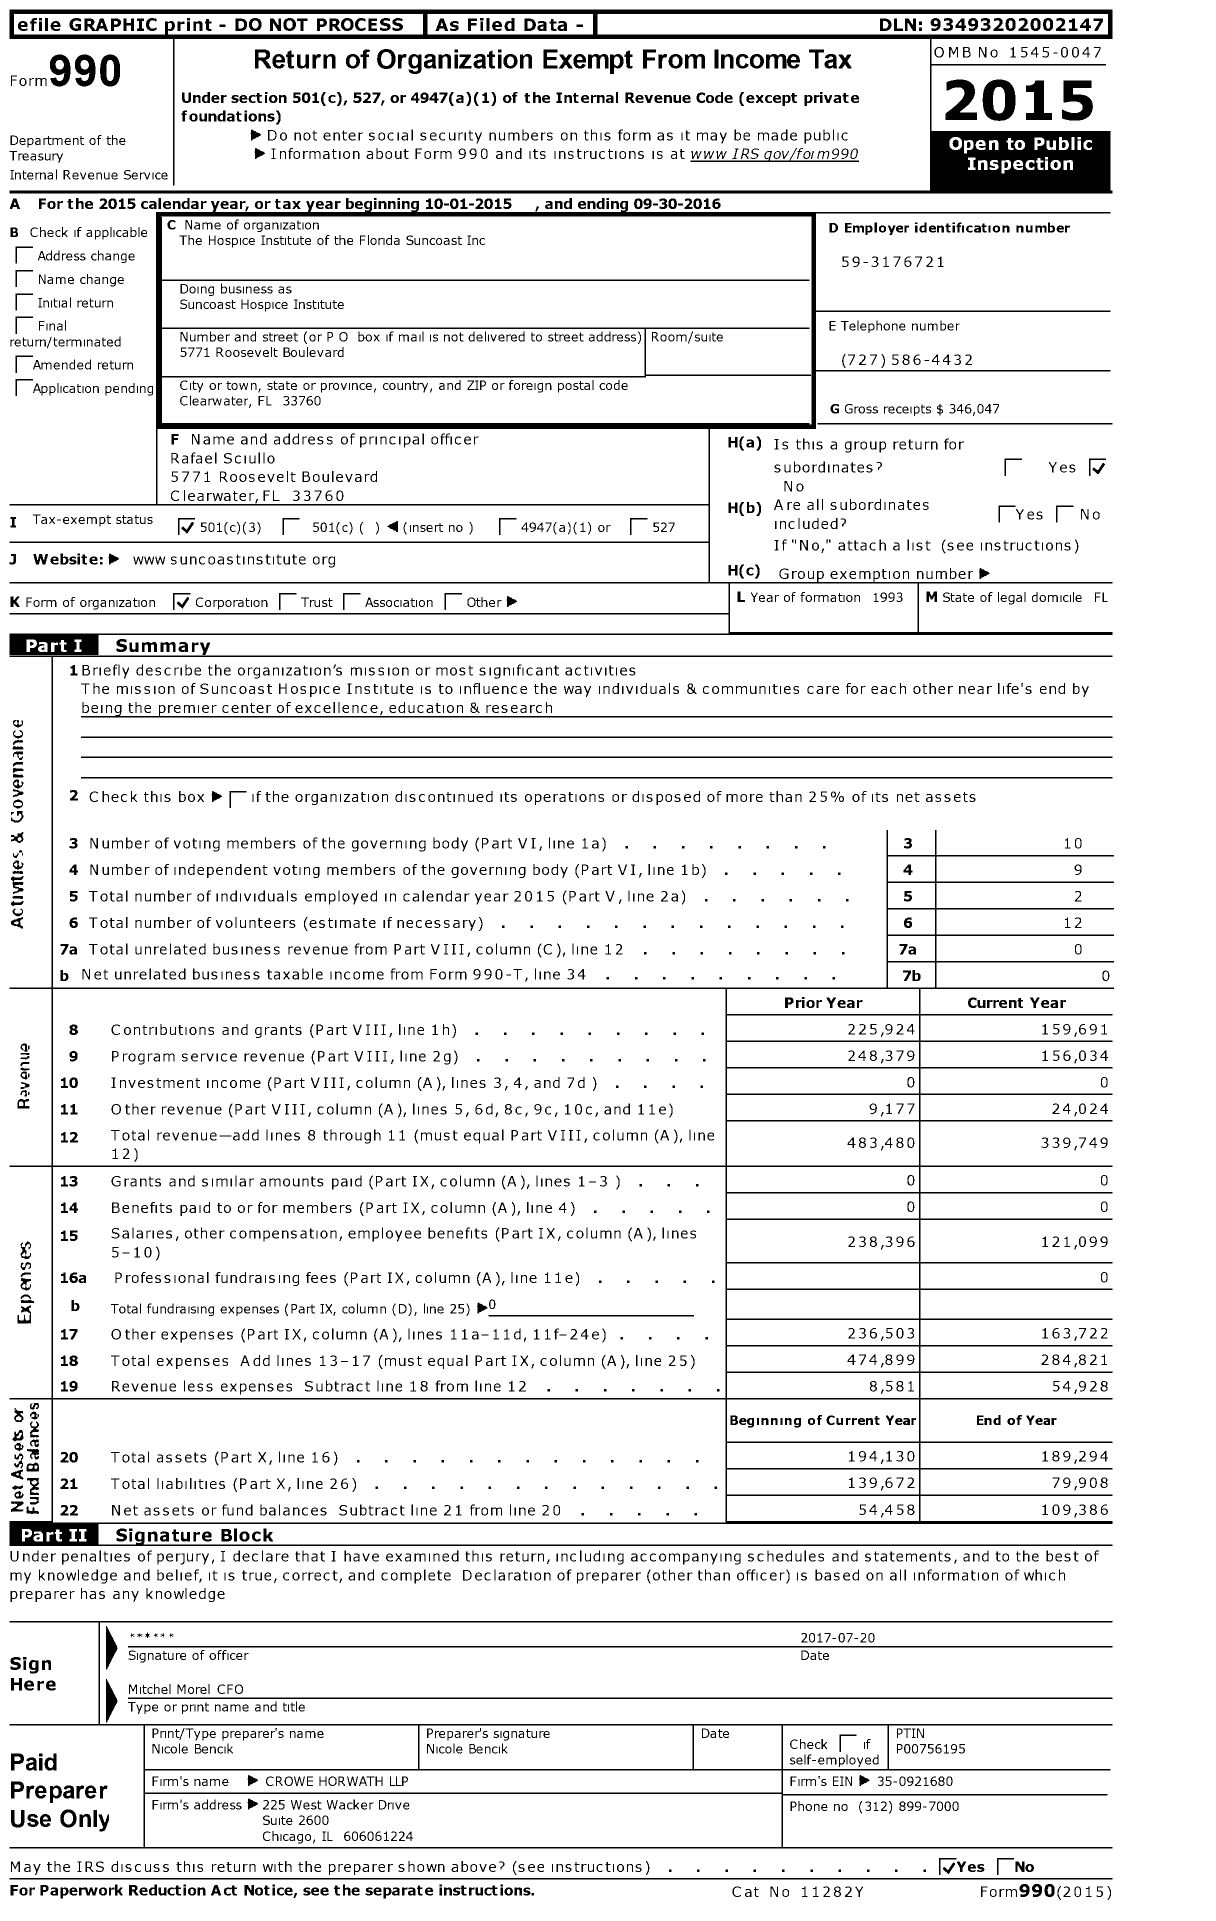 Image of first page of 2015 Form 990 for the Hospice Institute of the Florida Suncoast